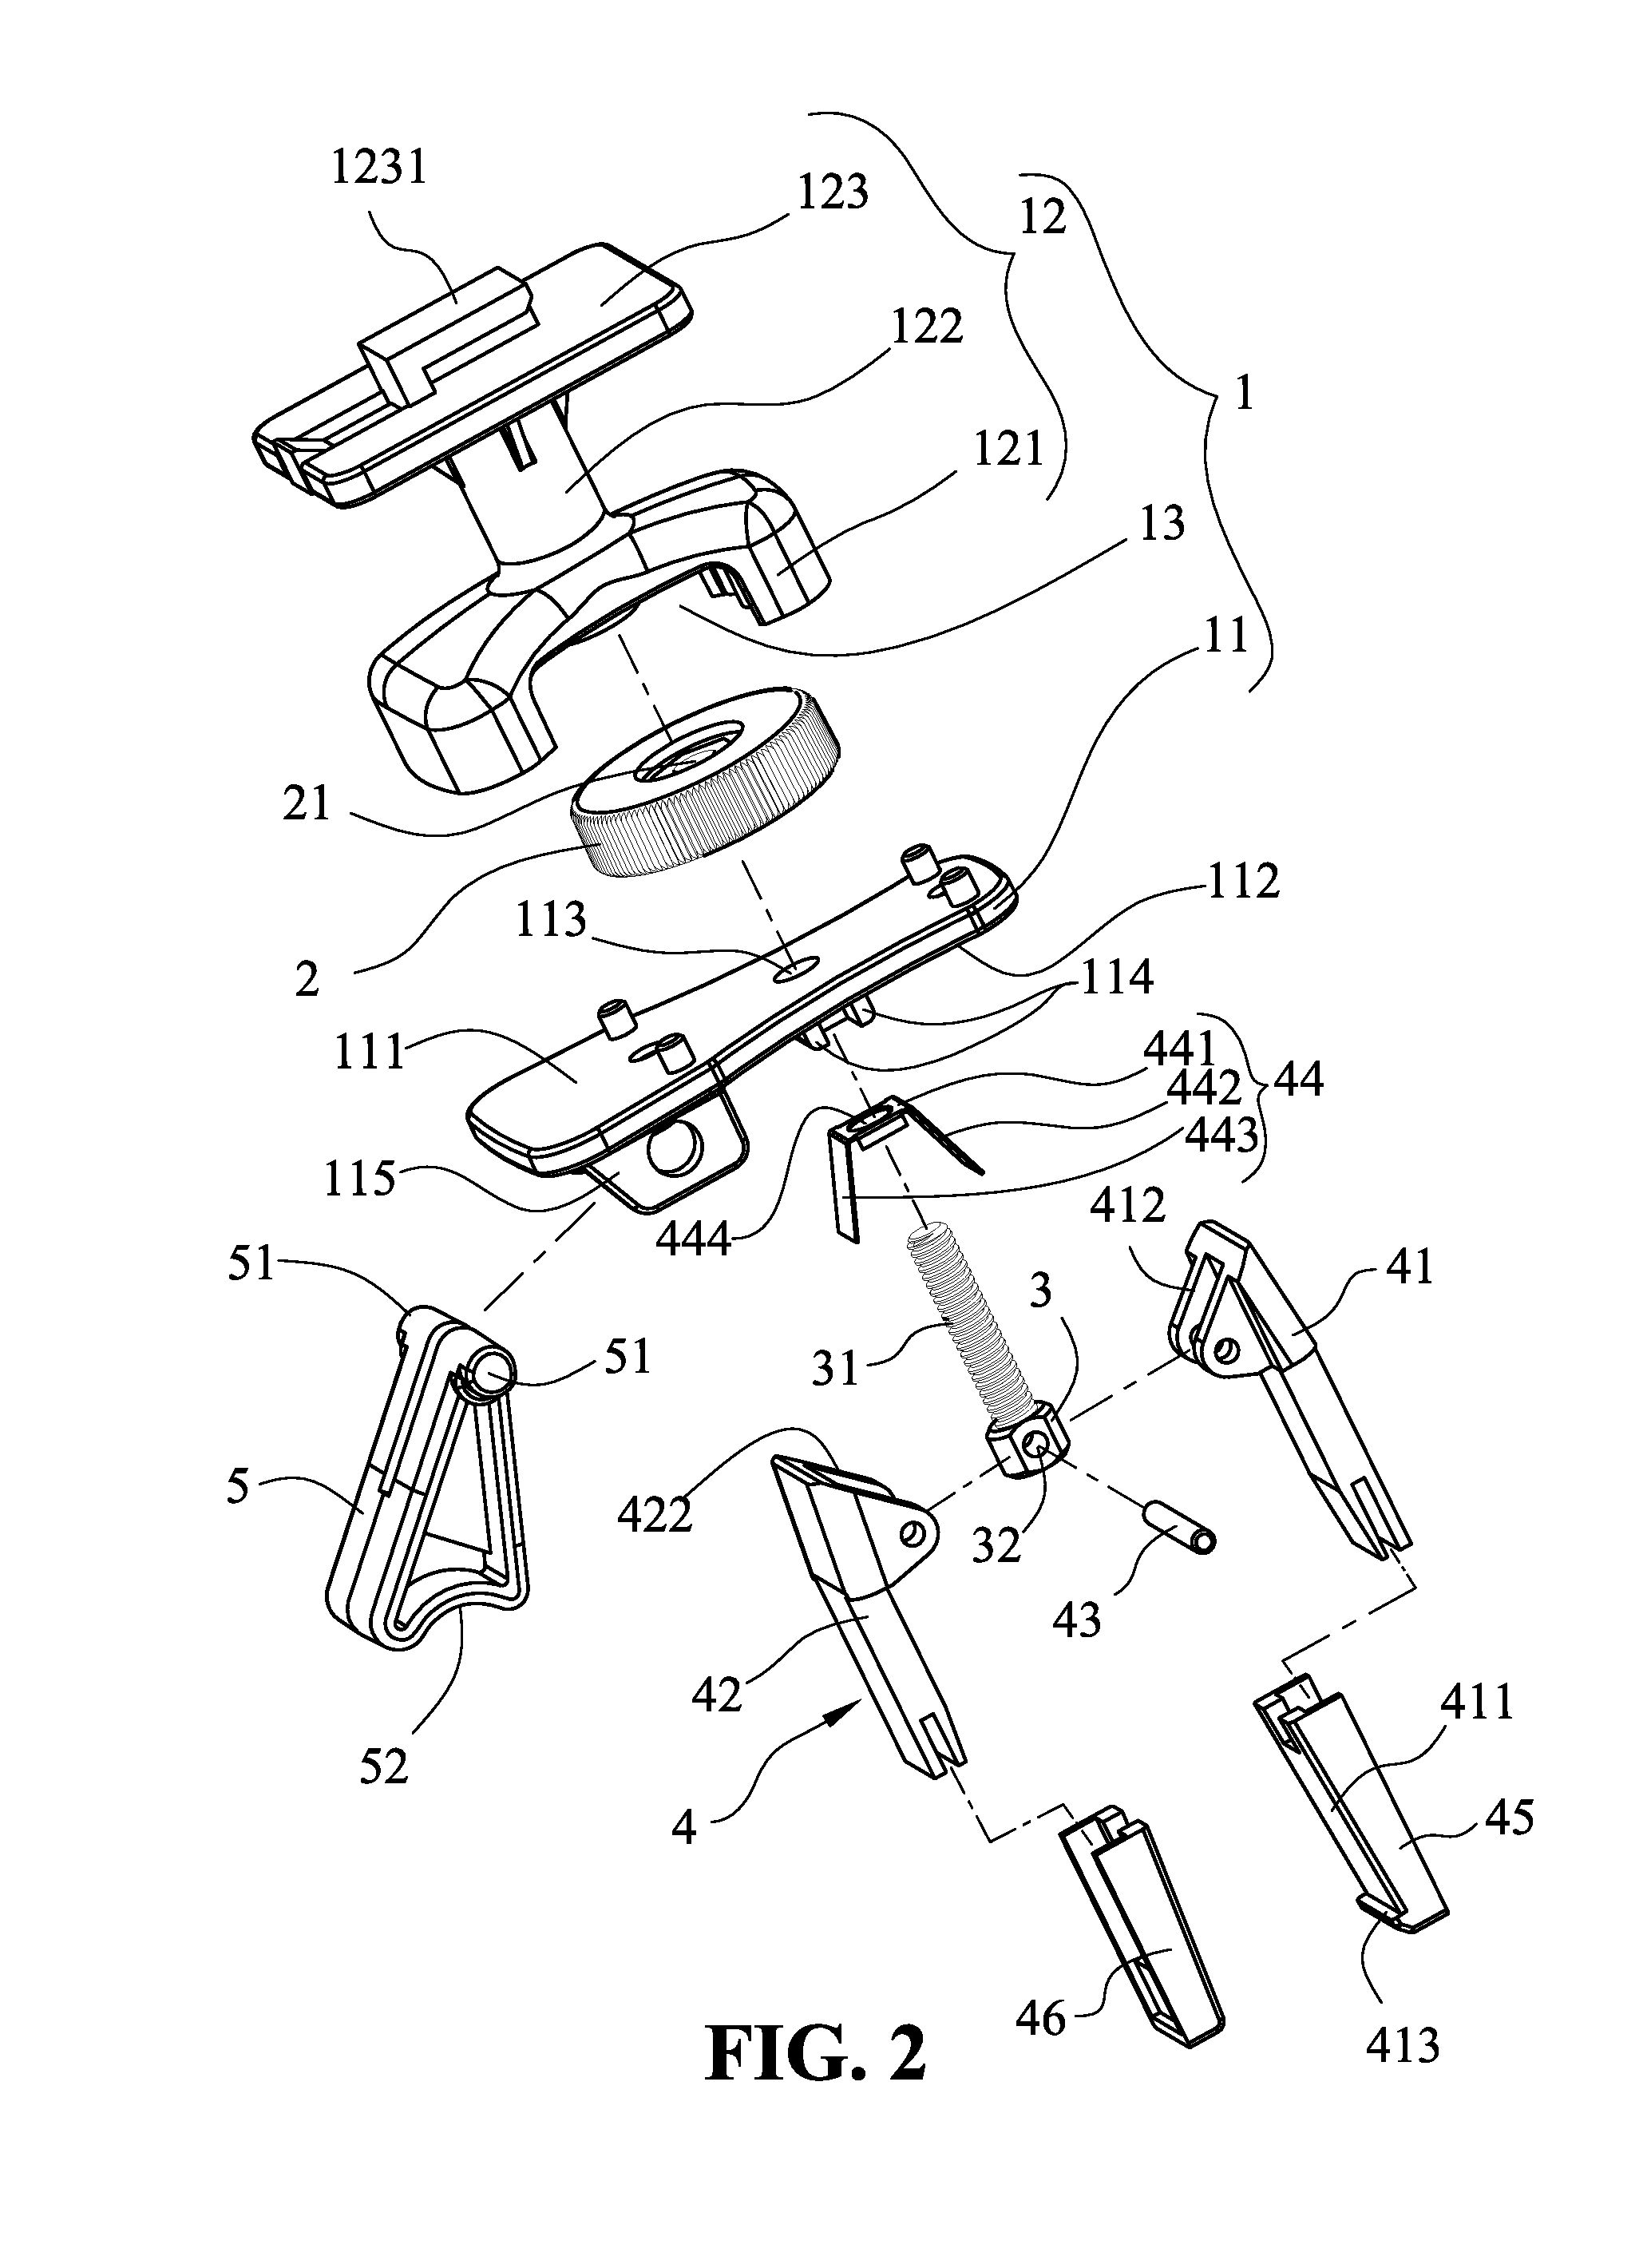 Fixture apparatus for automotive air-conditioning outlet